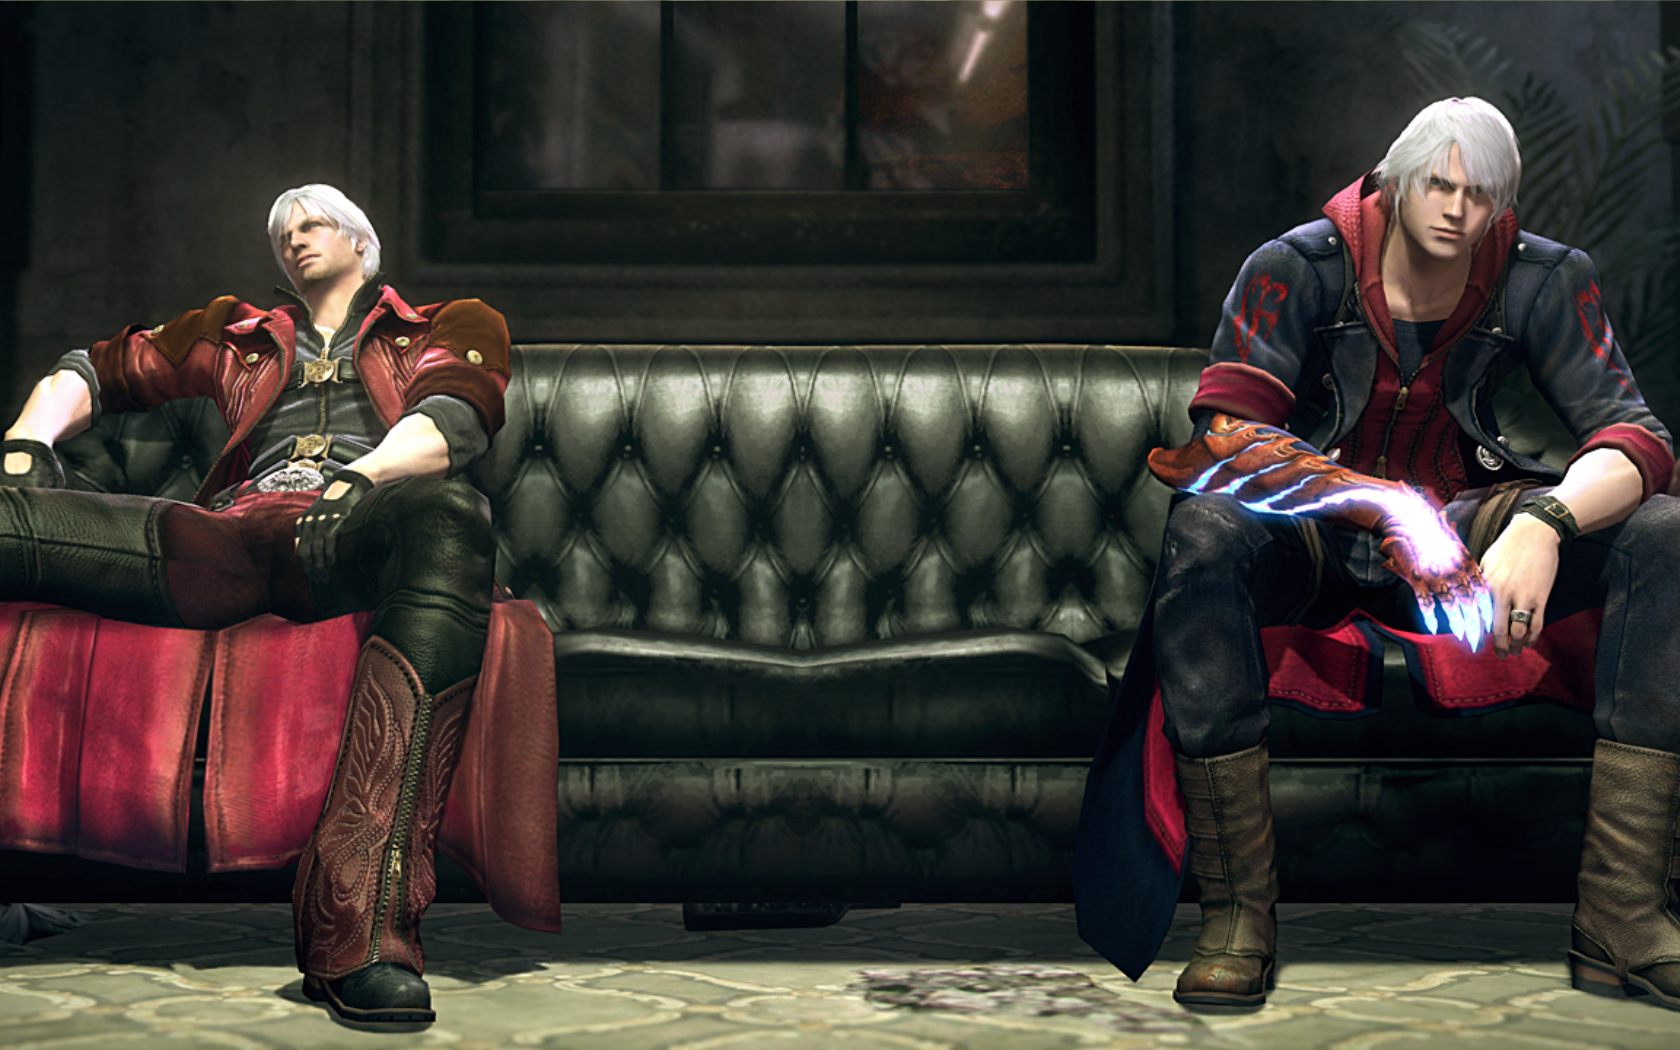 General 1680x1050 Devil May Cry DmC: Devil May Cry video games Dante (Devil May Cry) Devil May Cry 4 video game men video game characters Nero (Devil May Cry)